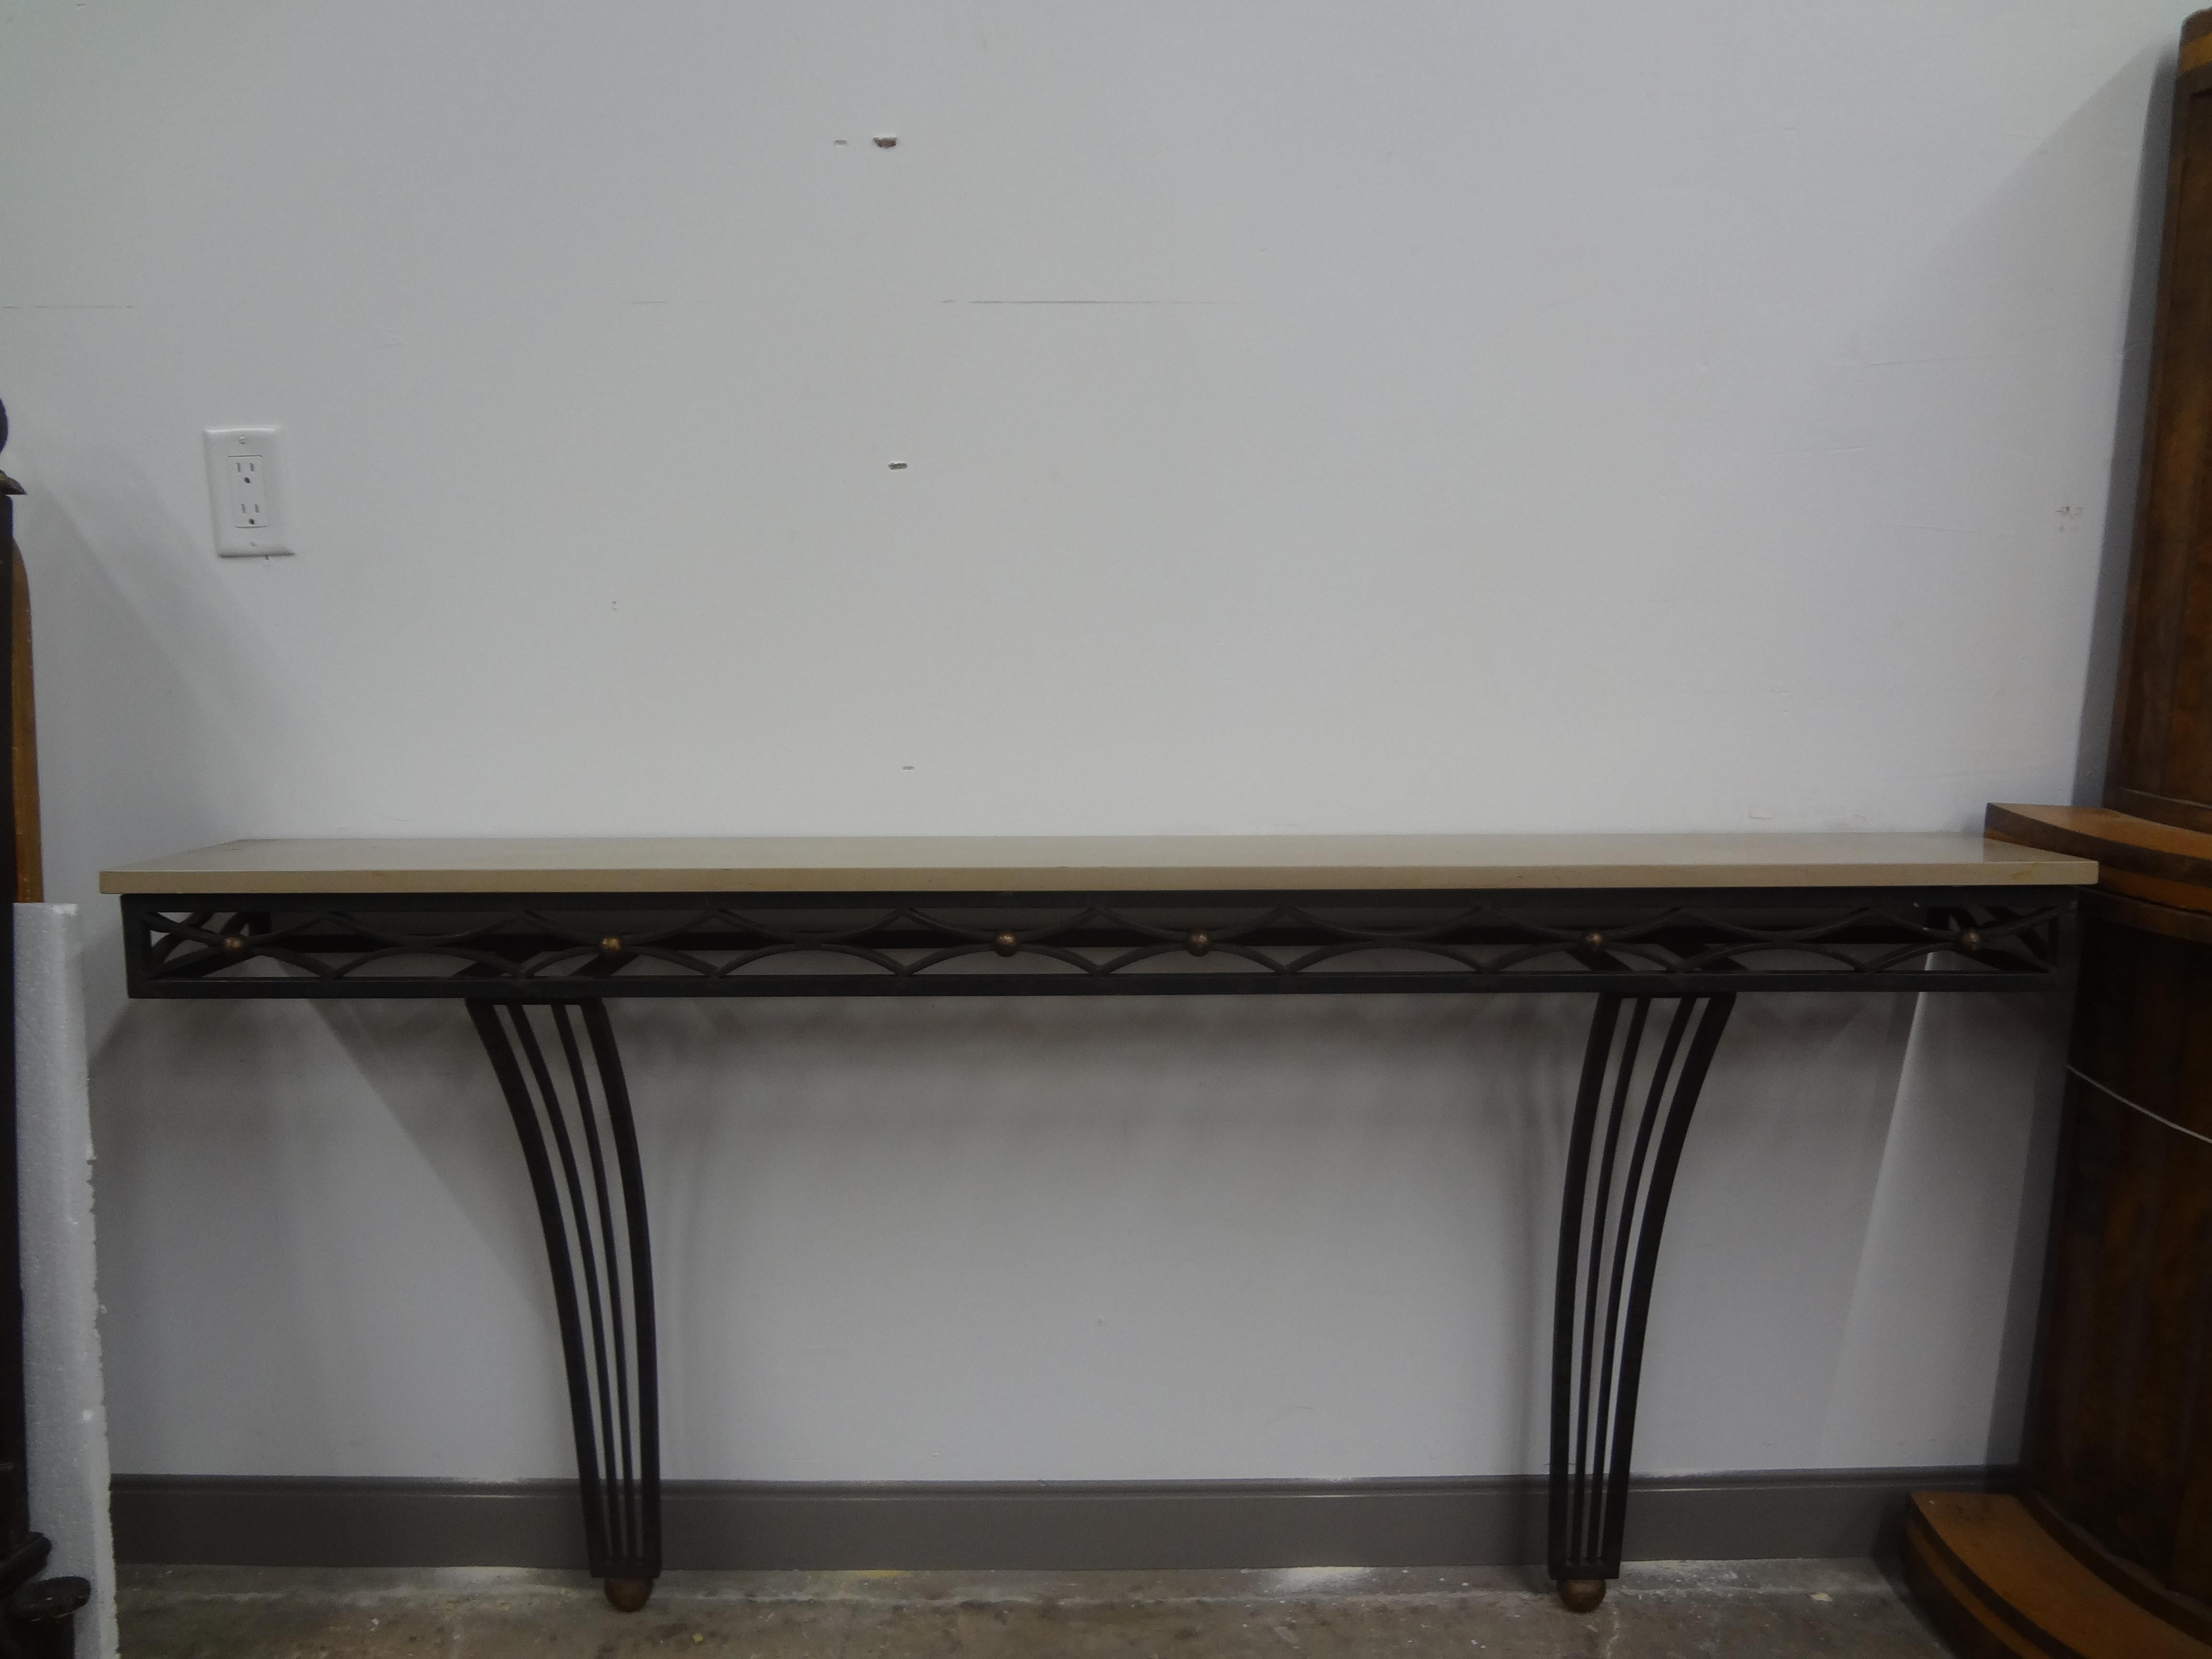 French Gilbert Poillerat Style Wrought Iron Console Table.
Stunning large French Art Deco Gilbert Poillerat inspired hand forged iron console table with marble top. This handsome Neoclassical style geometric iron console table with gilt iron